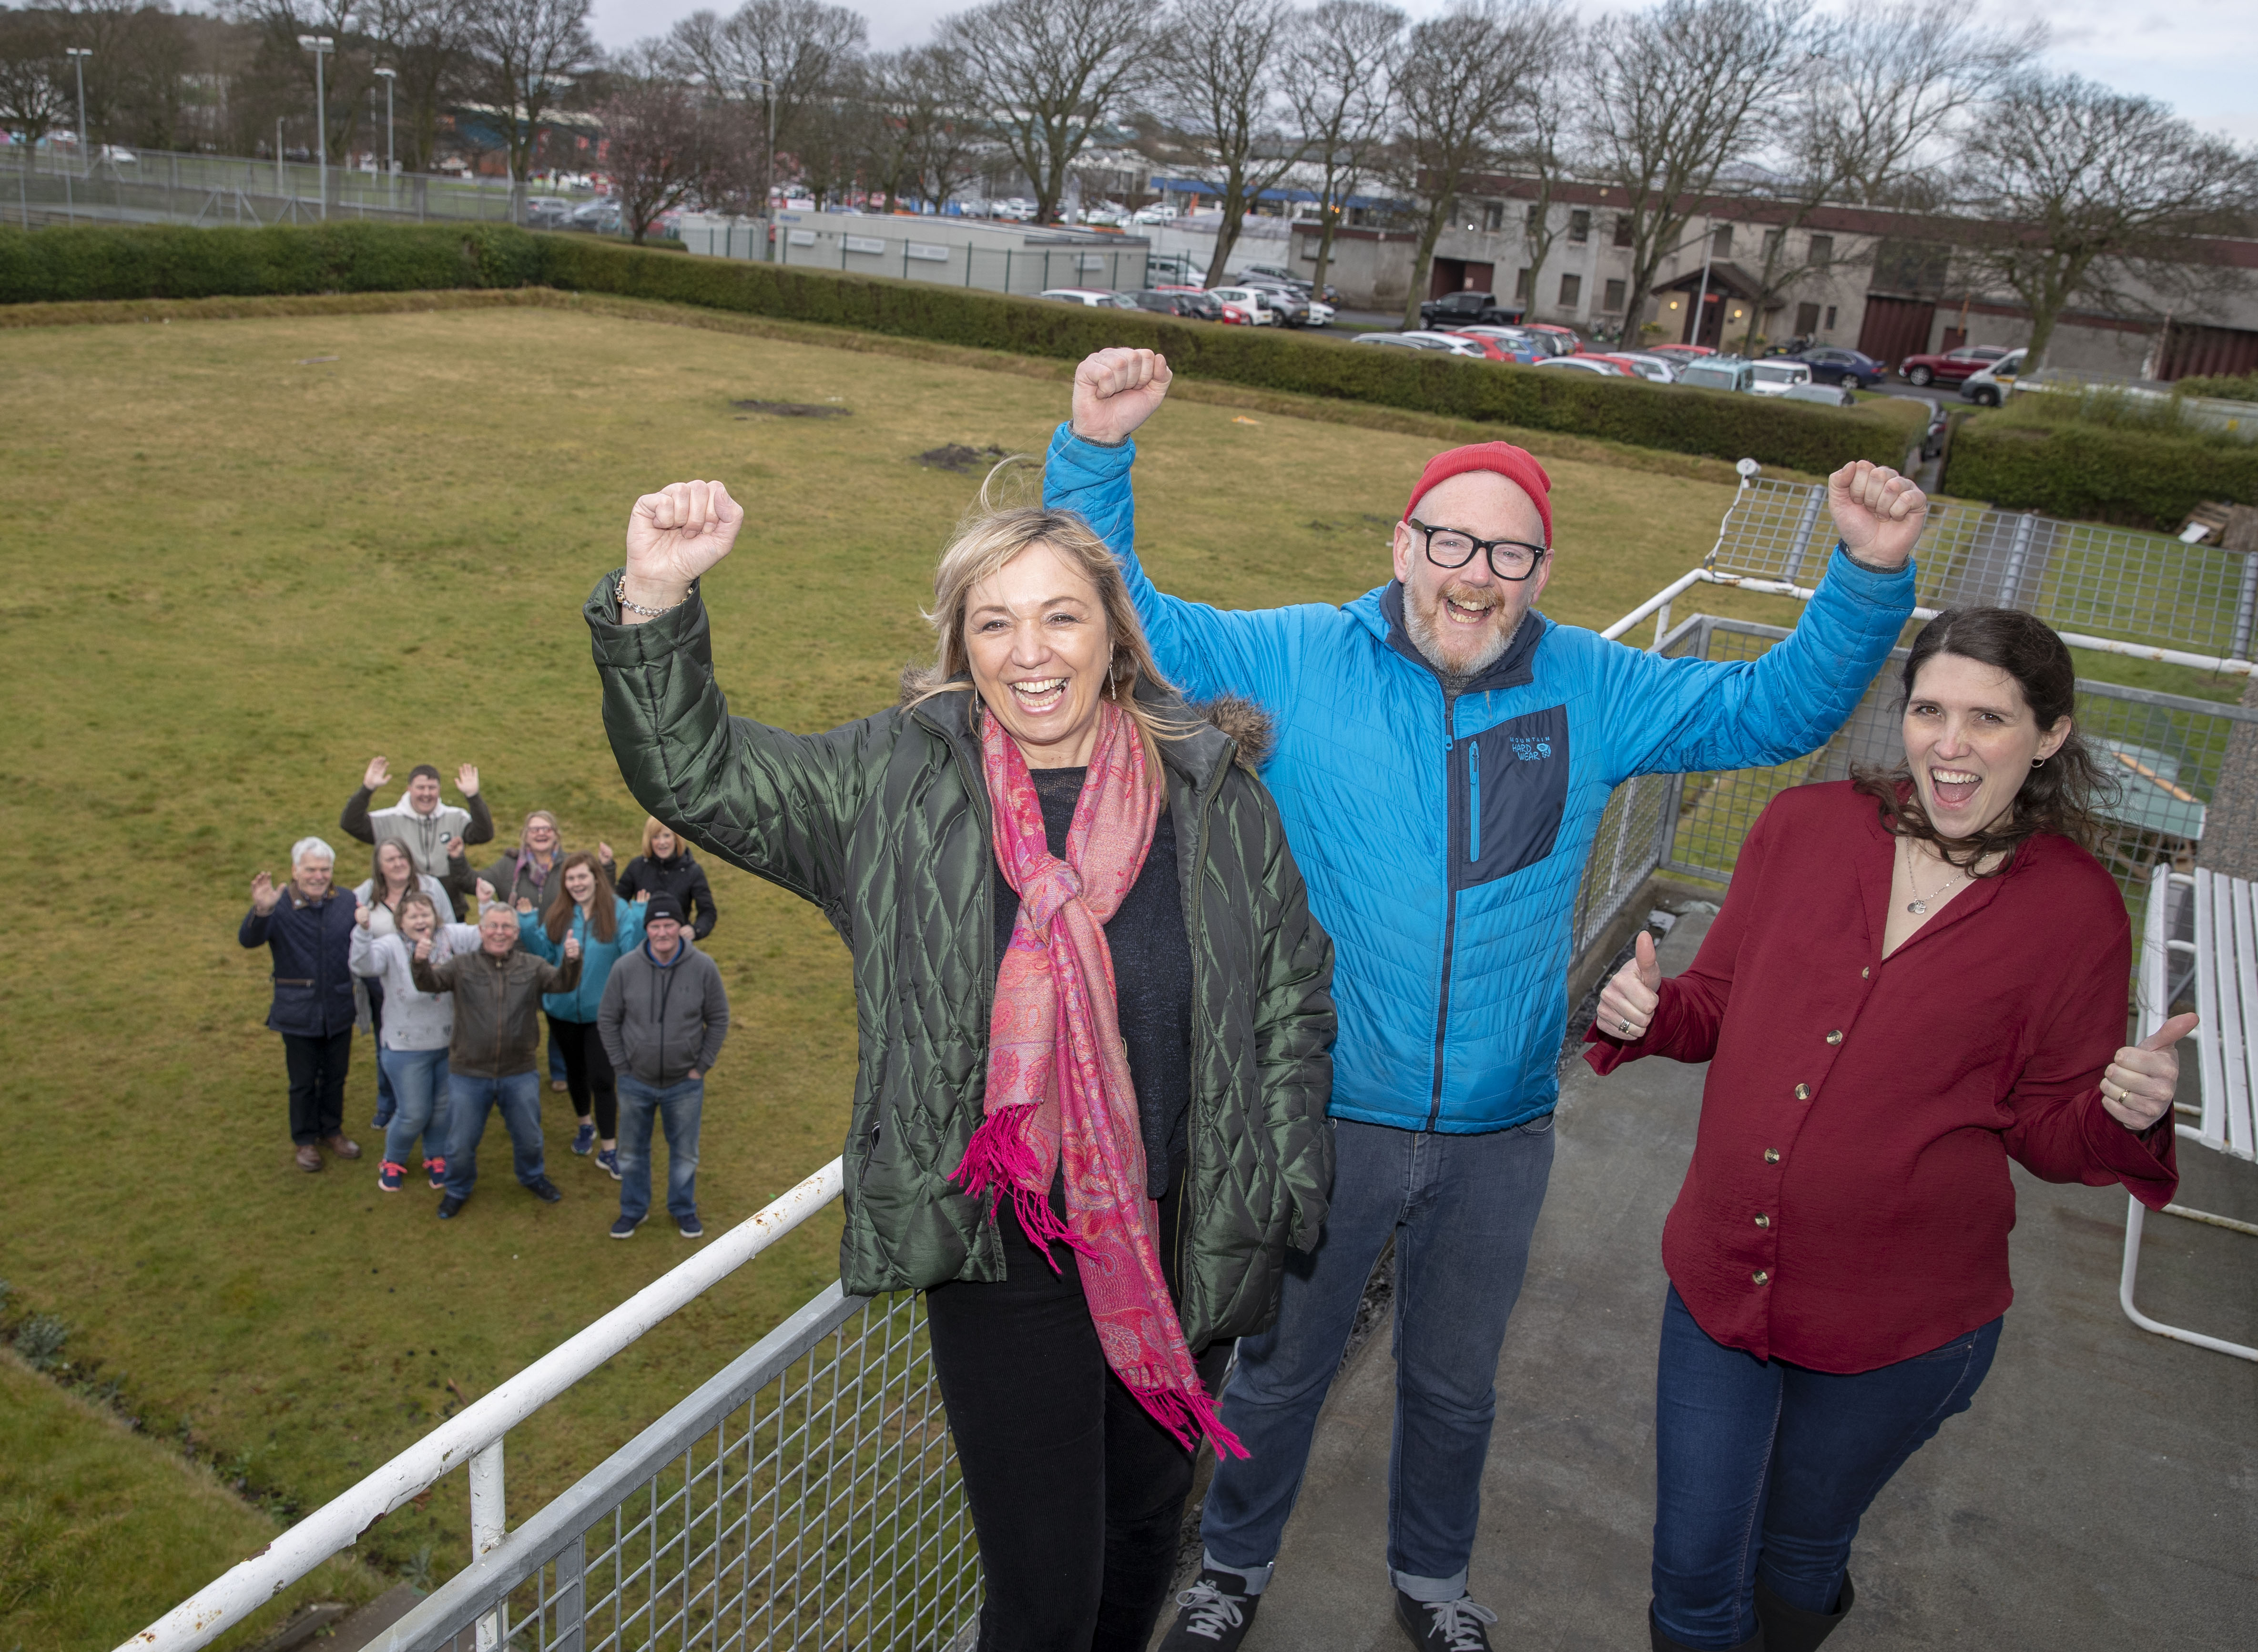 Debbie Kelly (Community Development Officer, Shug Hughes, Gallatown Hub leader and Joanne Cairns, Gallatown hub join members to celebrate at the old bowling club grounds following the announcement